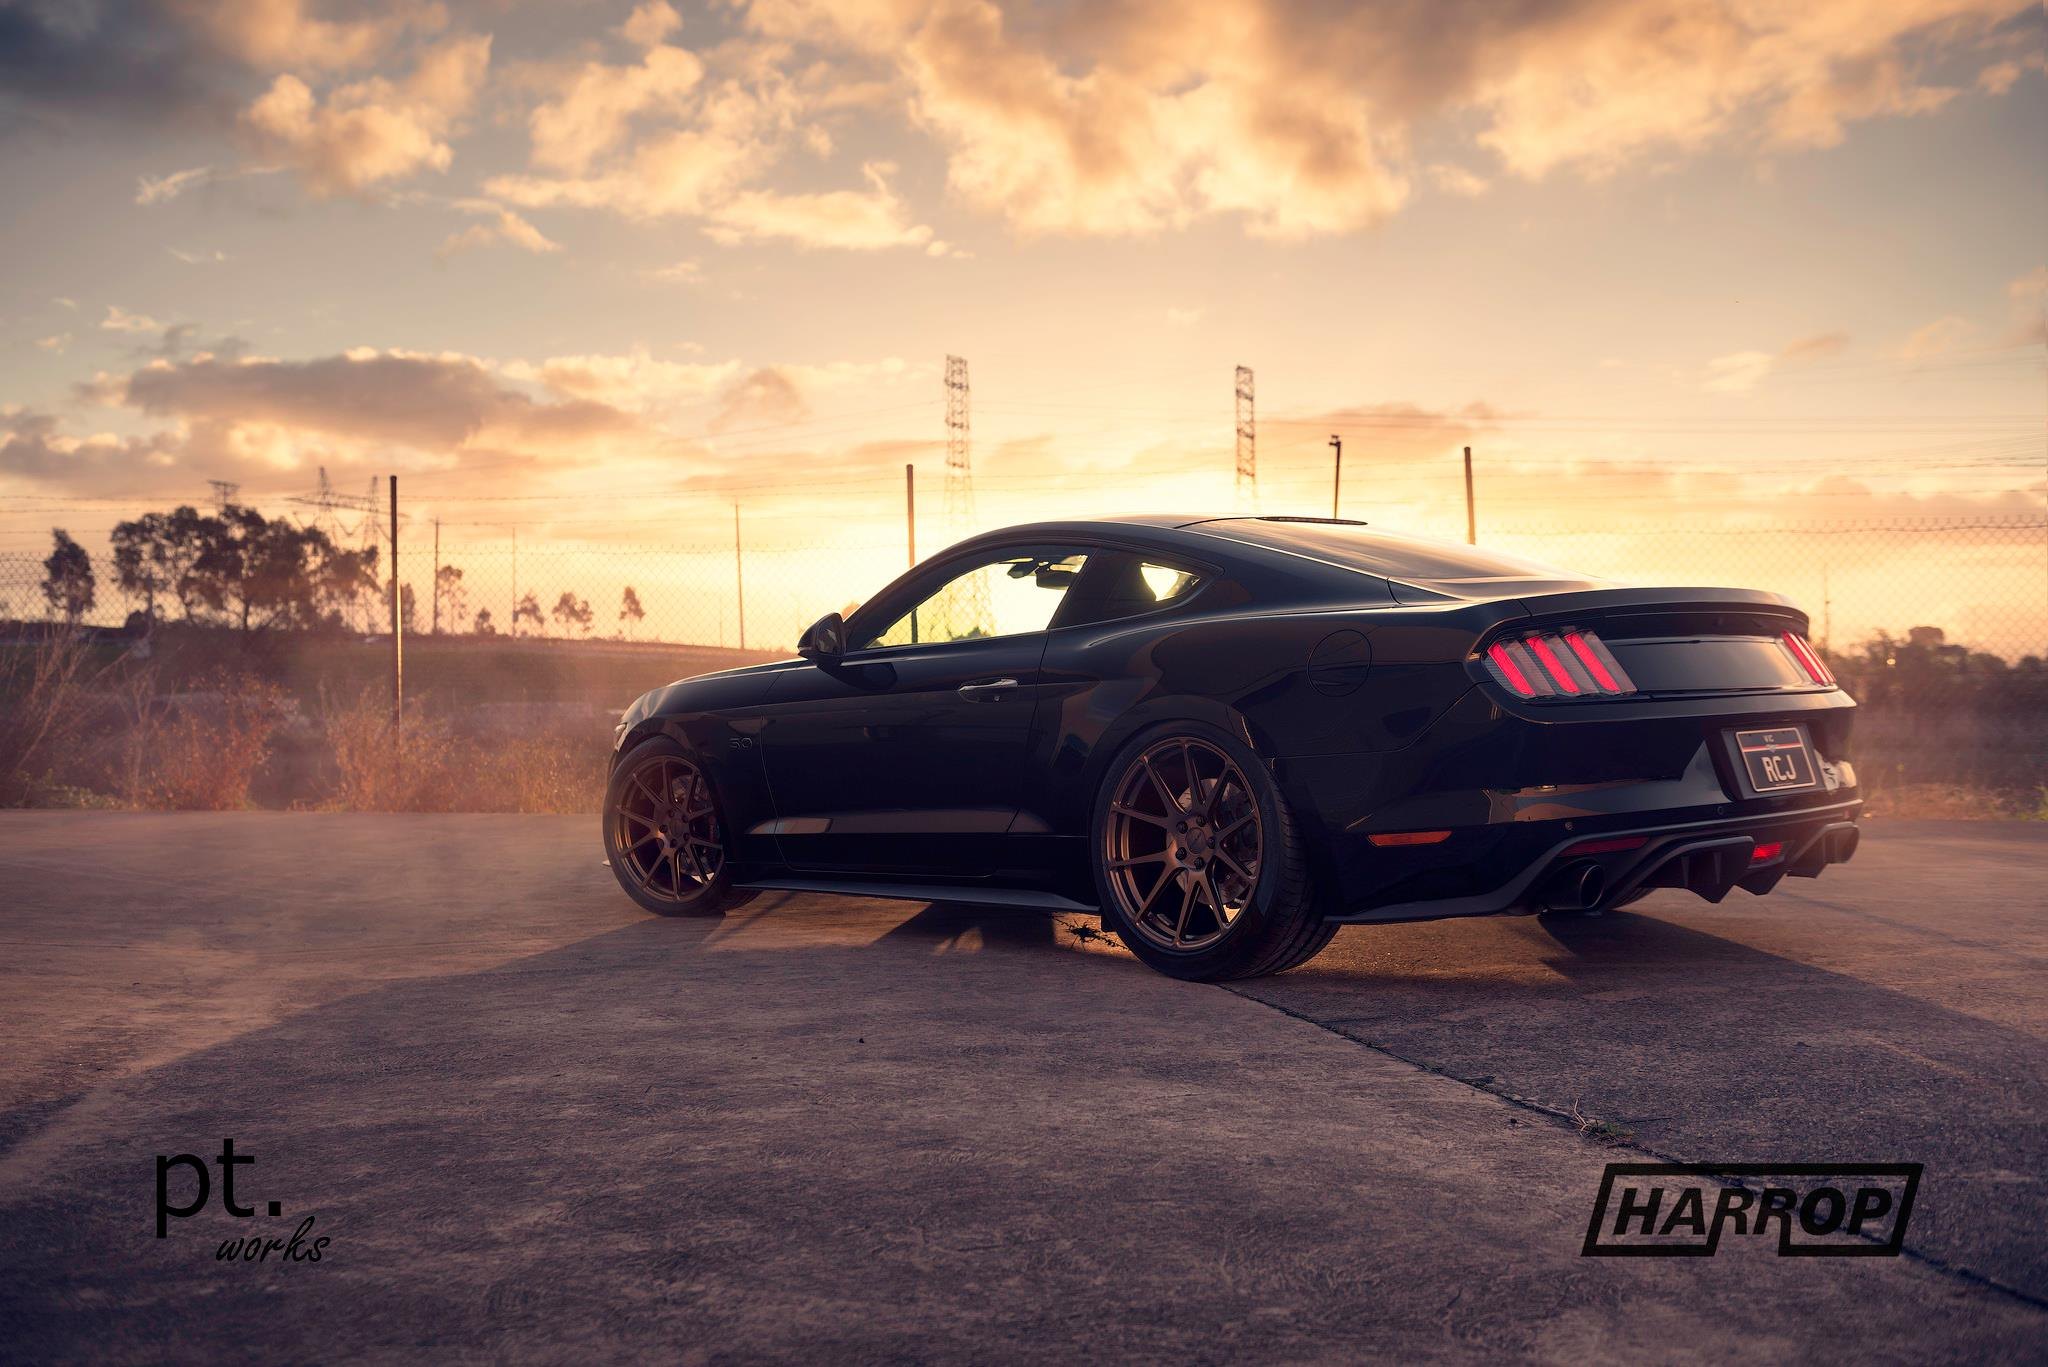 Custom Rear Diffuser on Black Ford Mustang - Photo by PT works